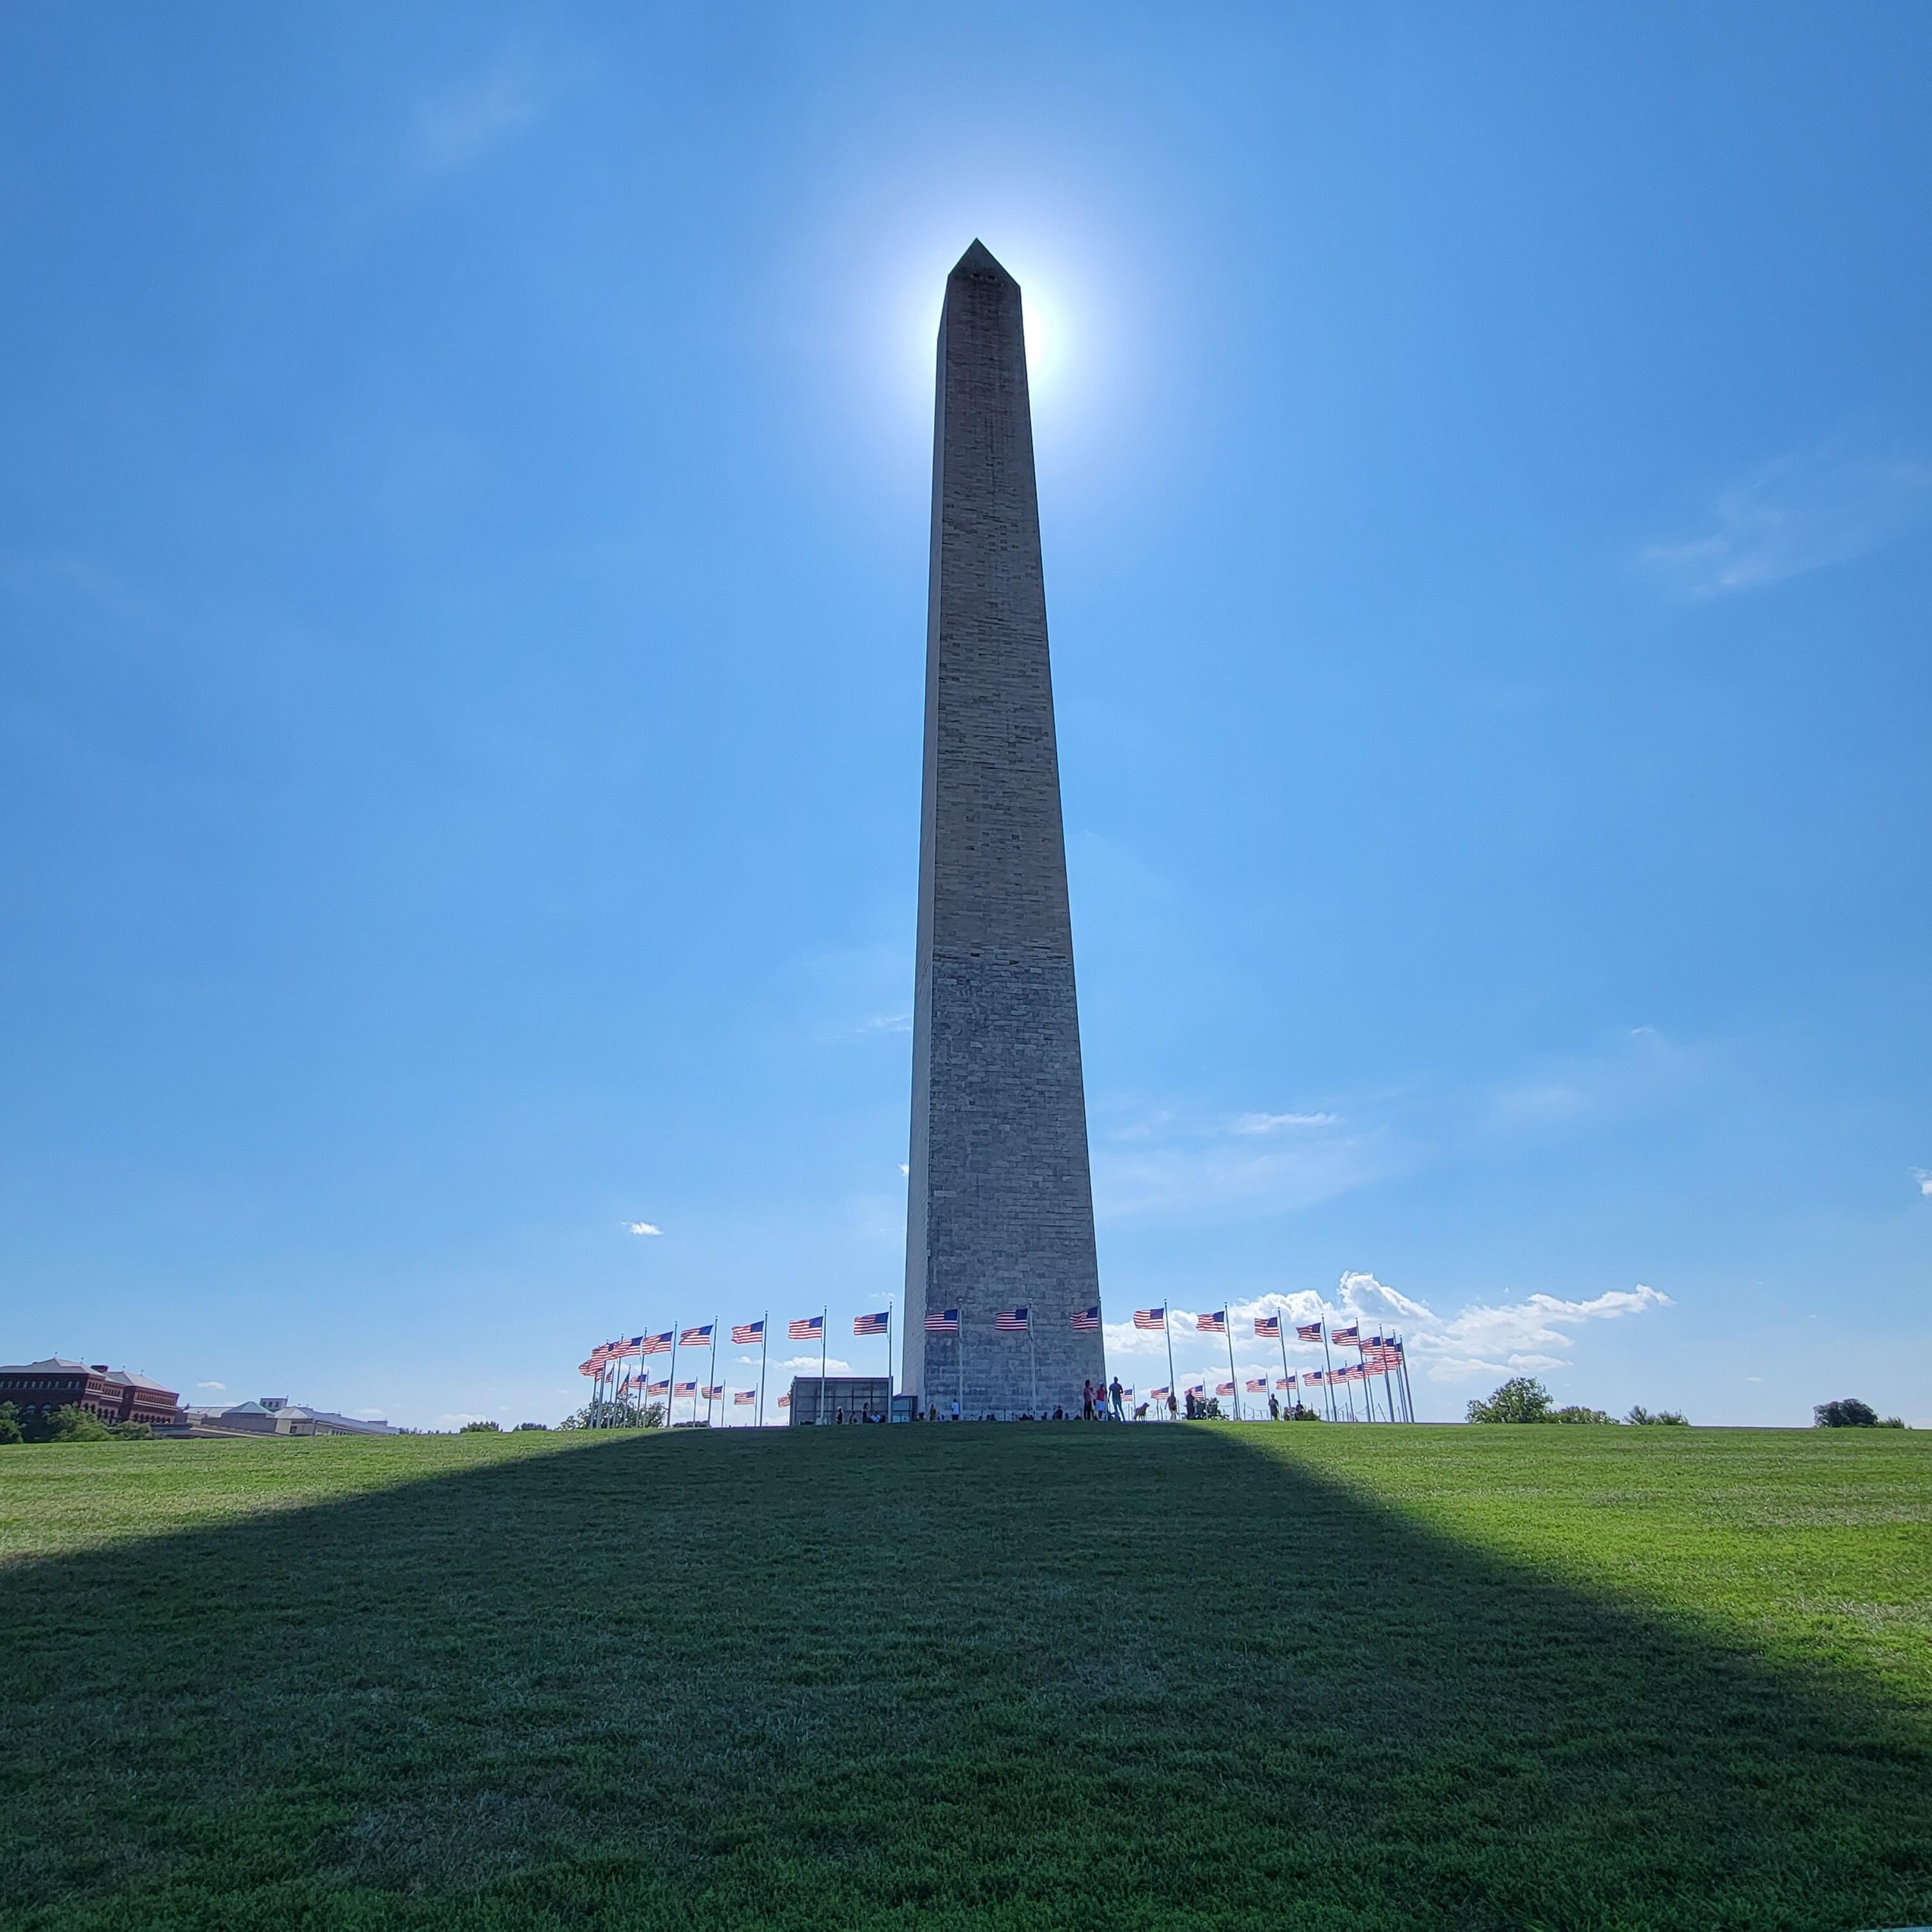 In the Shadow of the Washington Monument